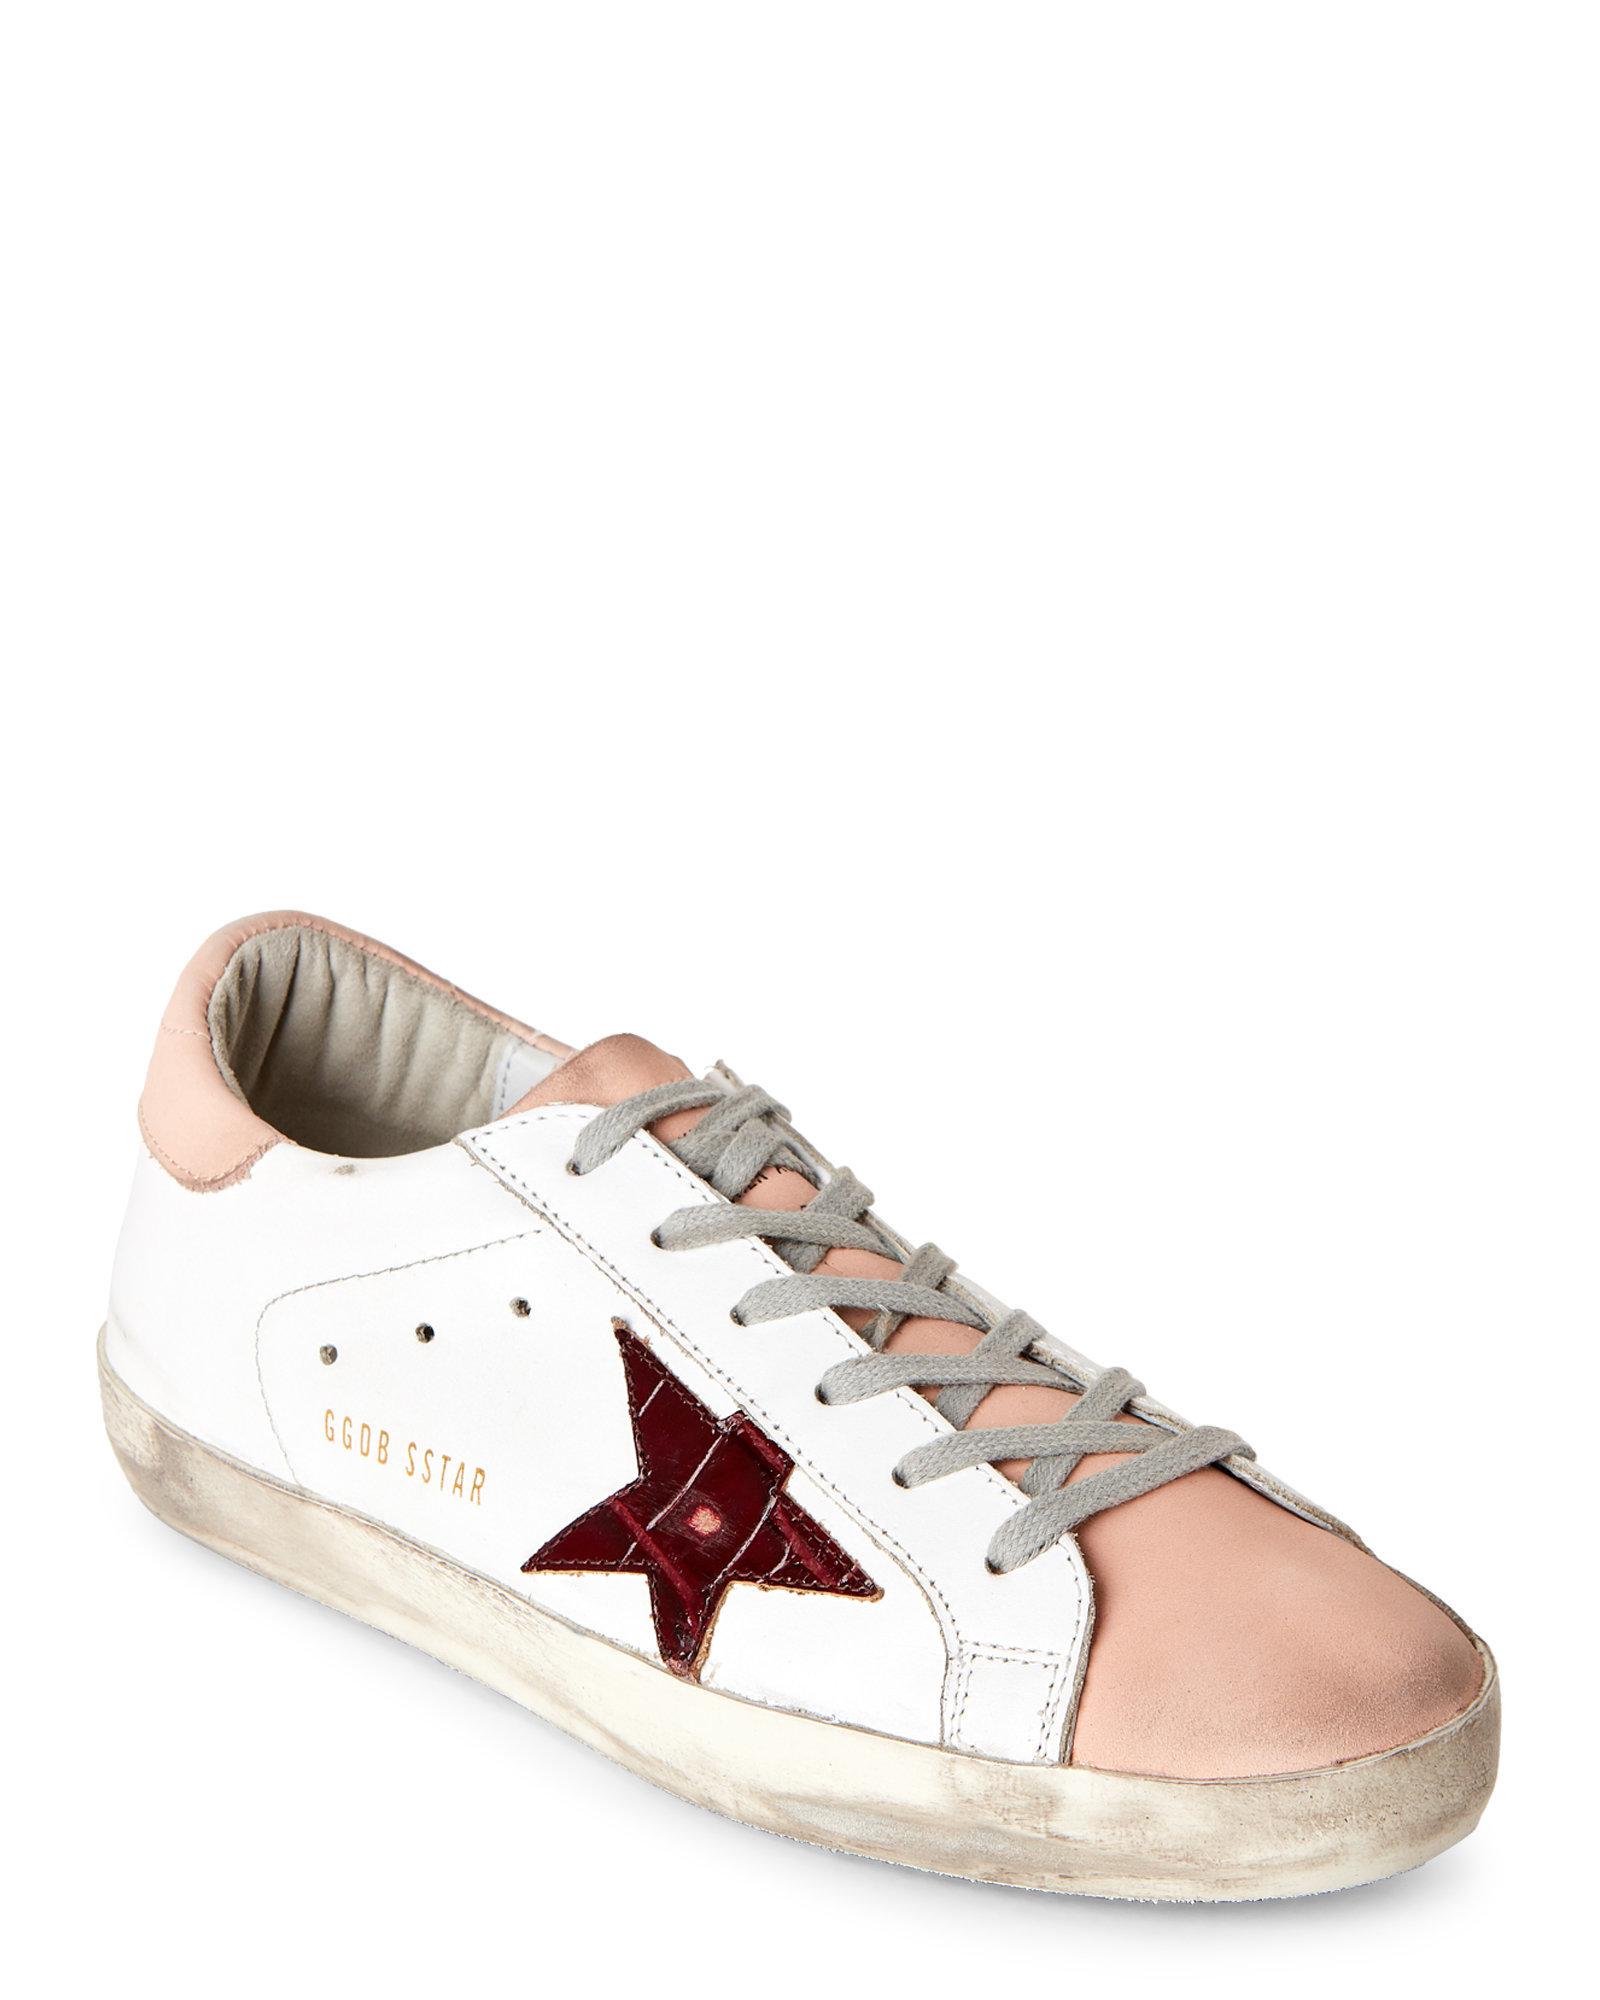 Golden Goose Deluxe Brand Leather White 